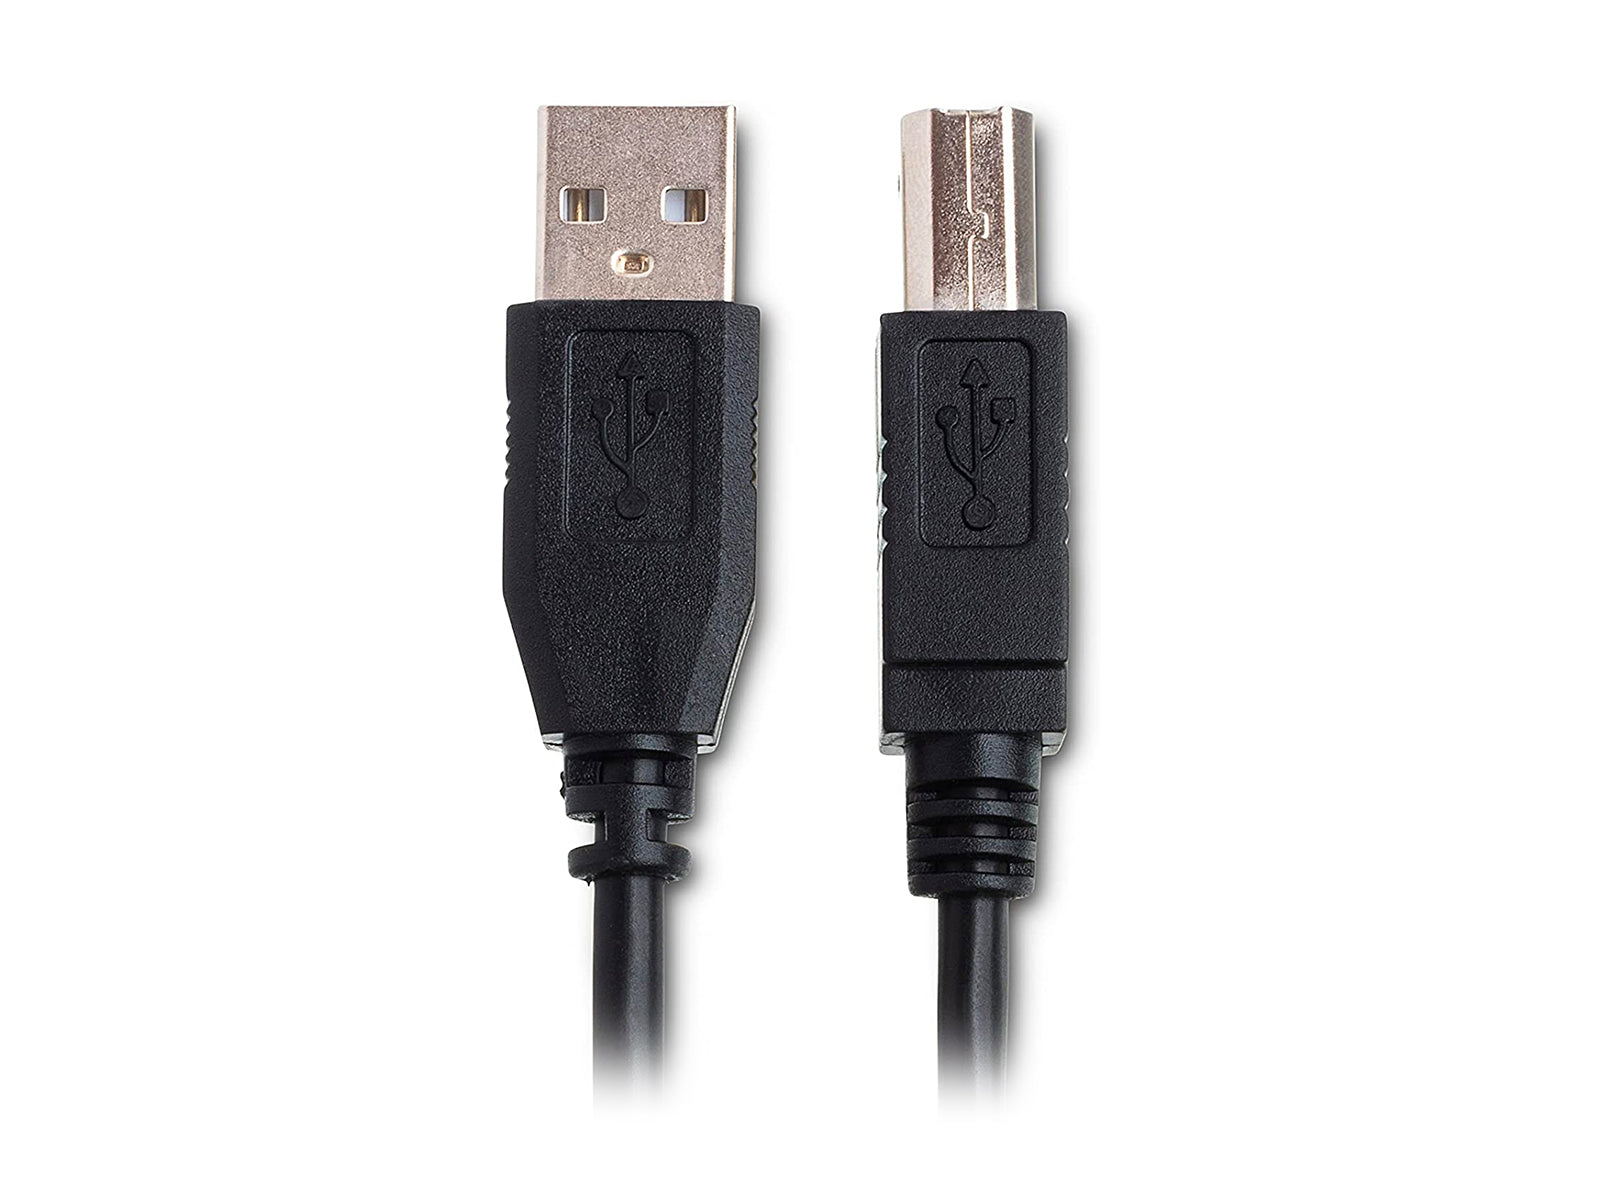 USB 2.0 Type-A to Type-B Data Cable 6ft (39917) Monitors.com 